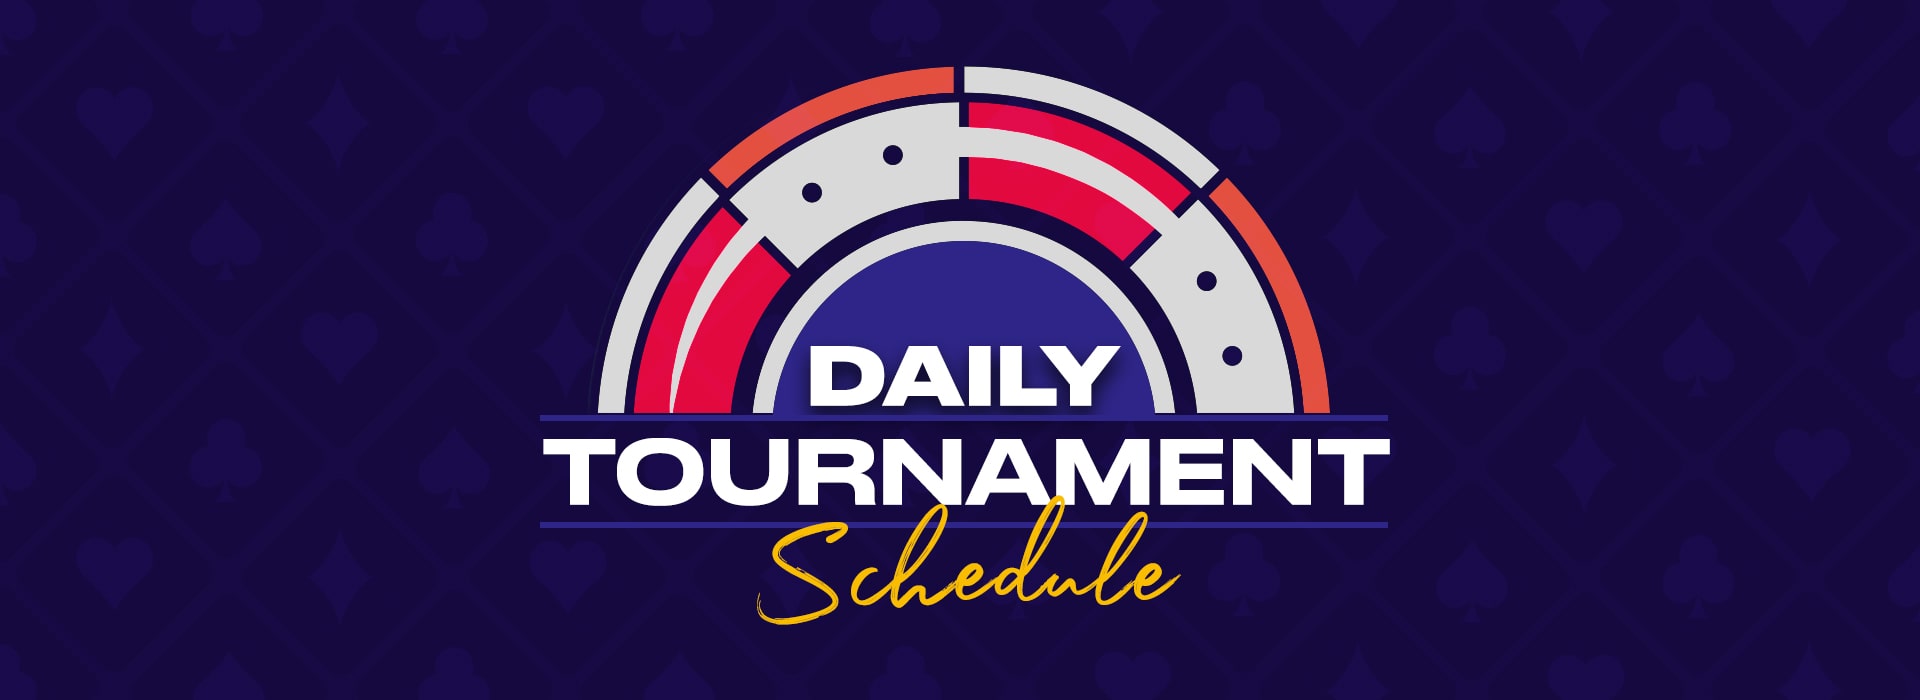 Refer Daily Poker Tournaments Schedule And Play Online